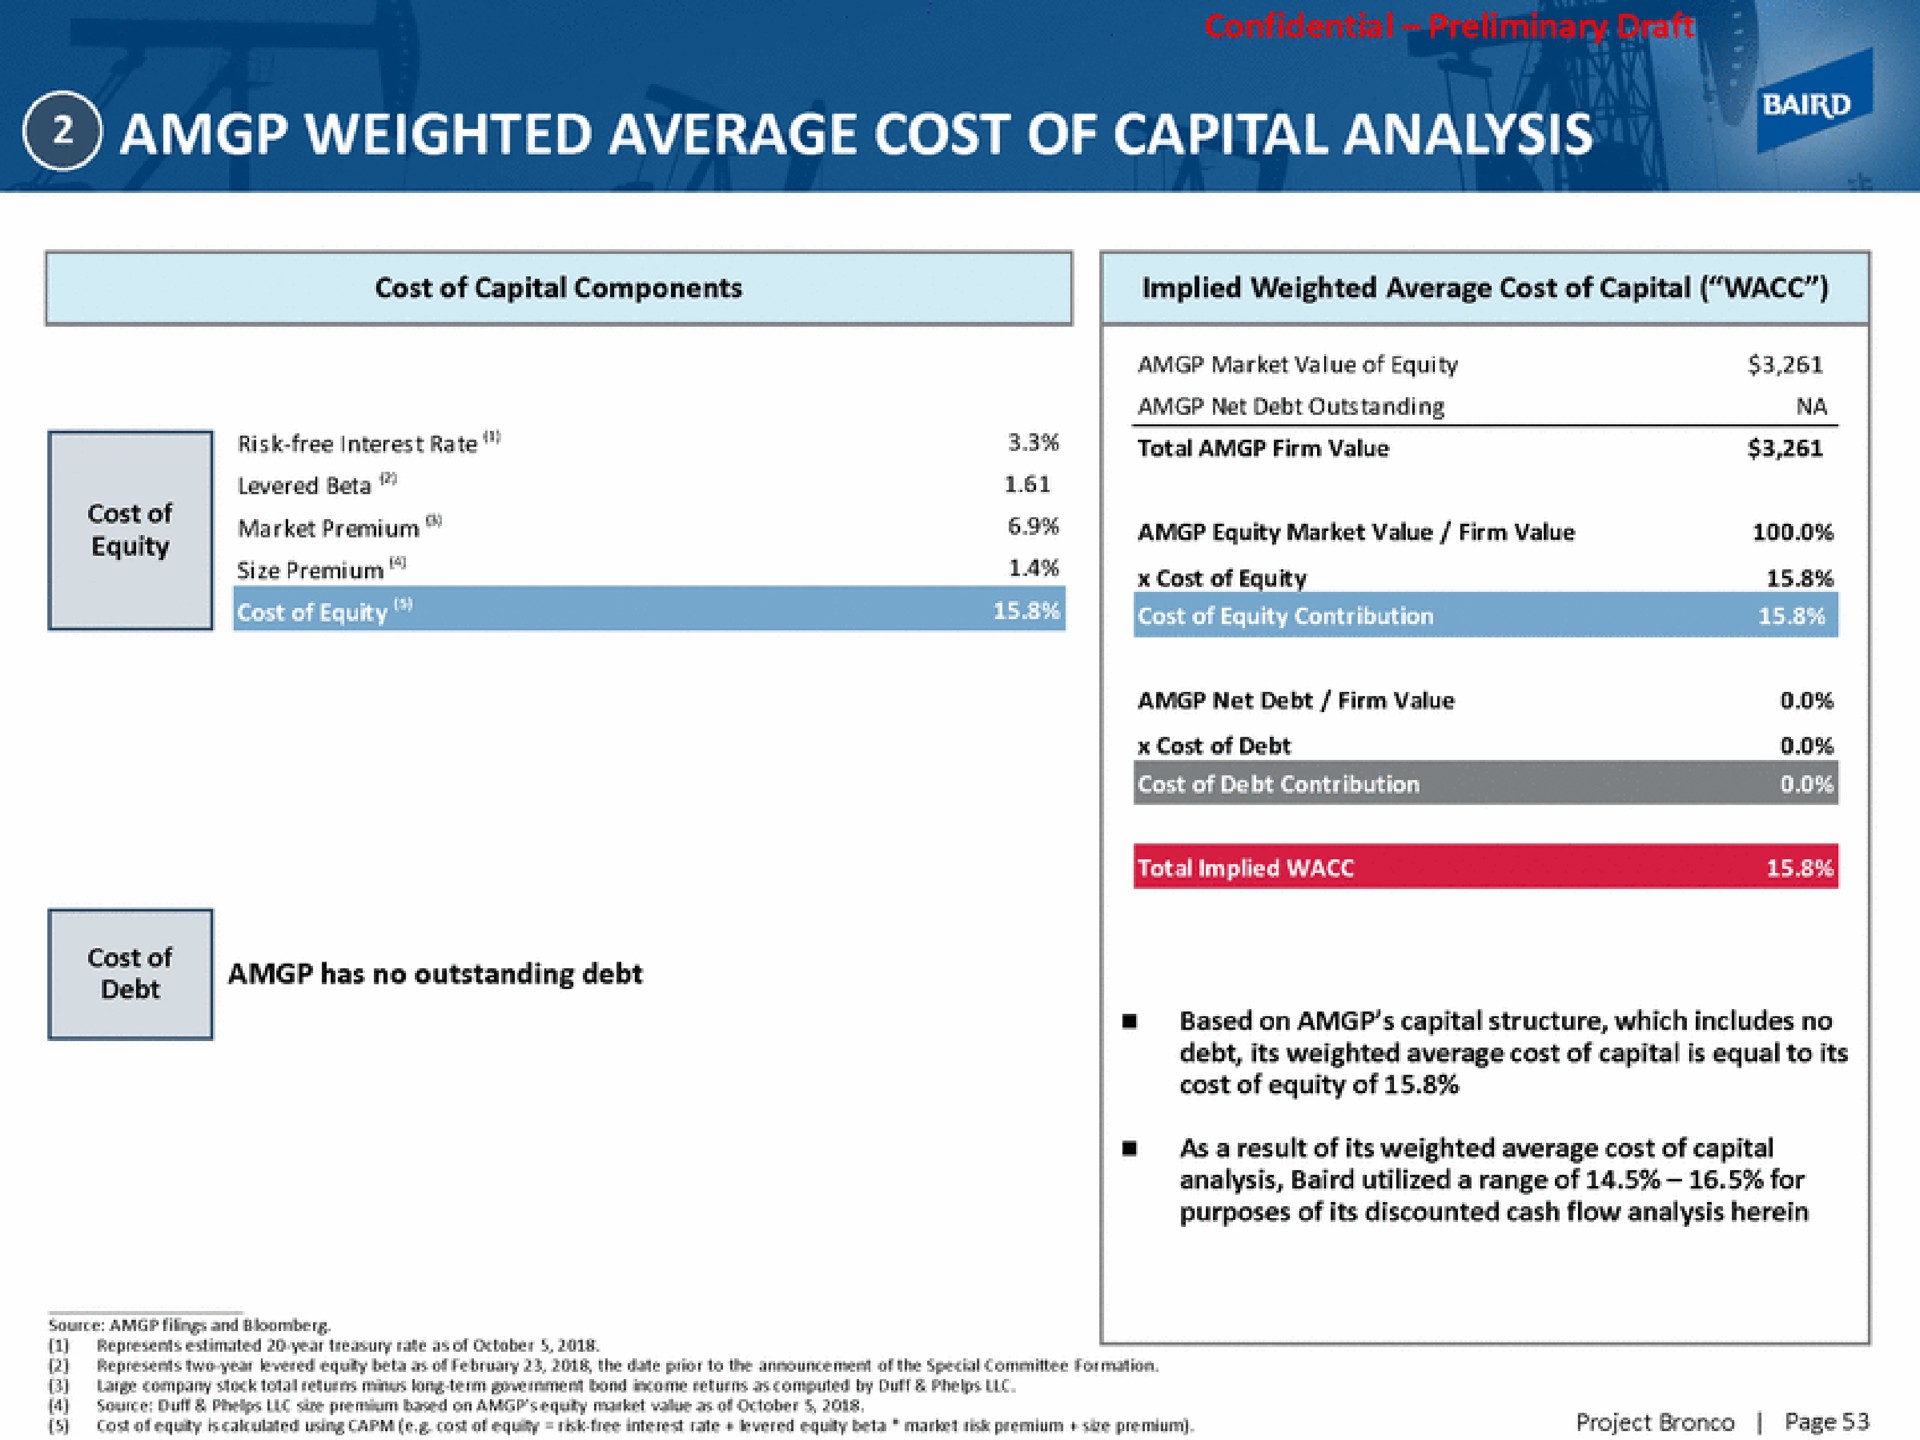 weighted average cost of capital analysis | Baird